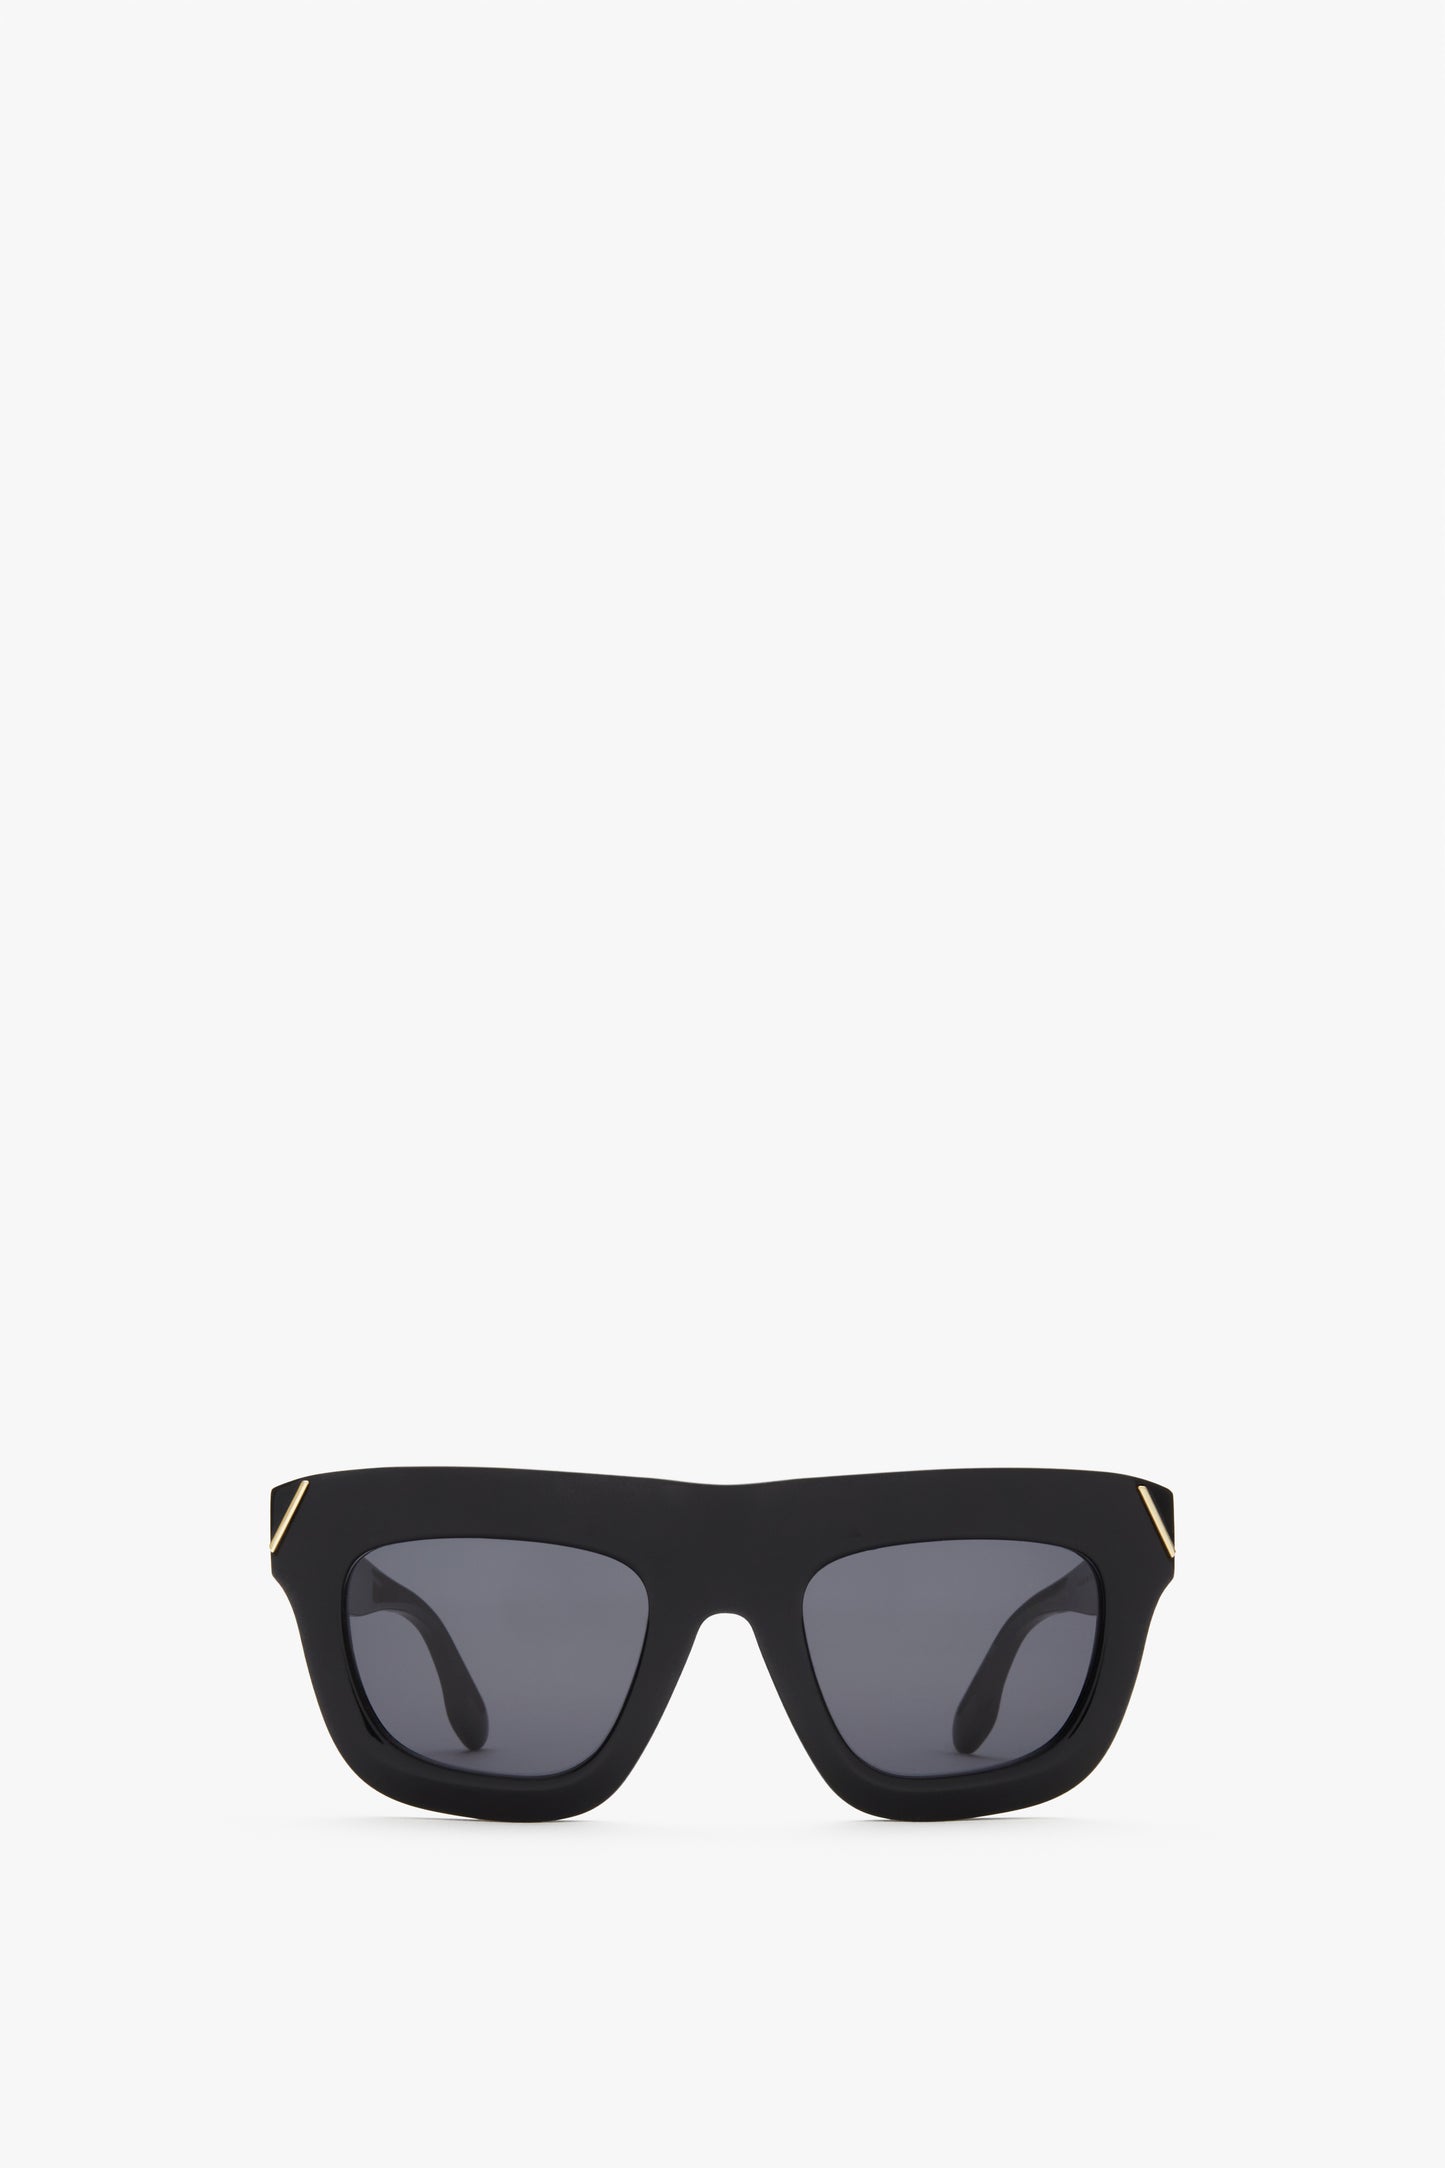 Wide oversized, square shaped sunglasses in black. These Victoria Beckham logo sunglasses have the VB logo on the temple and V shaped metal detailing on the hinges. Stylish and oversized yet in a classically vintage wide sunglass shape.